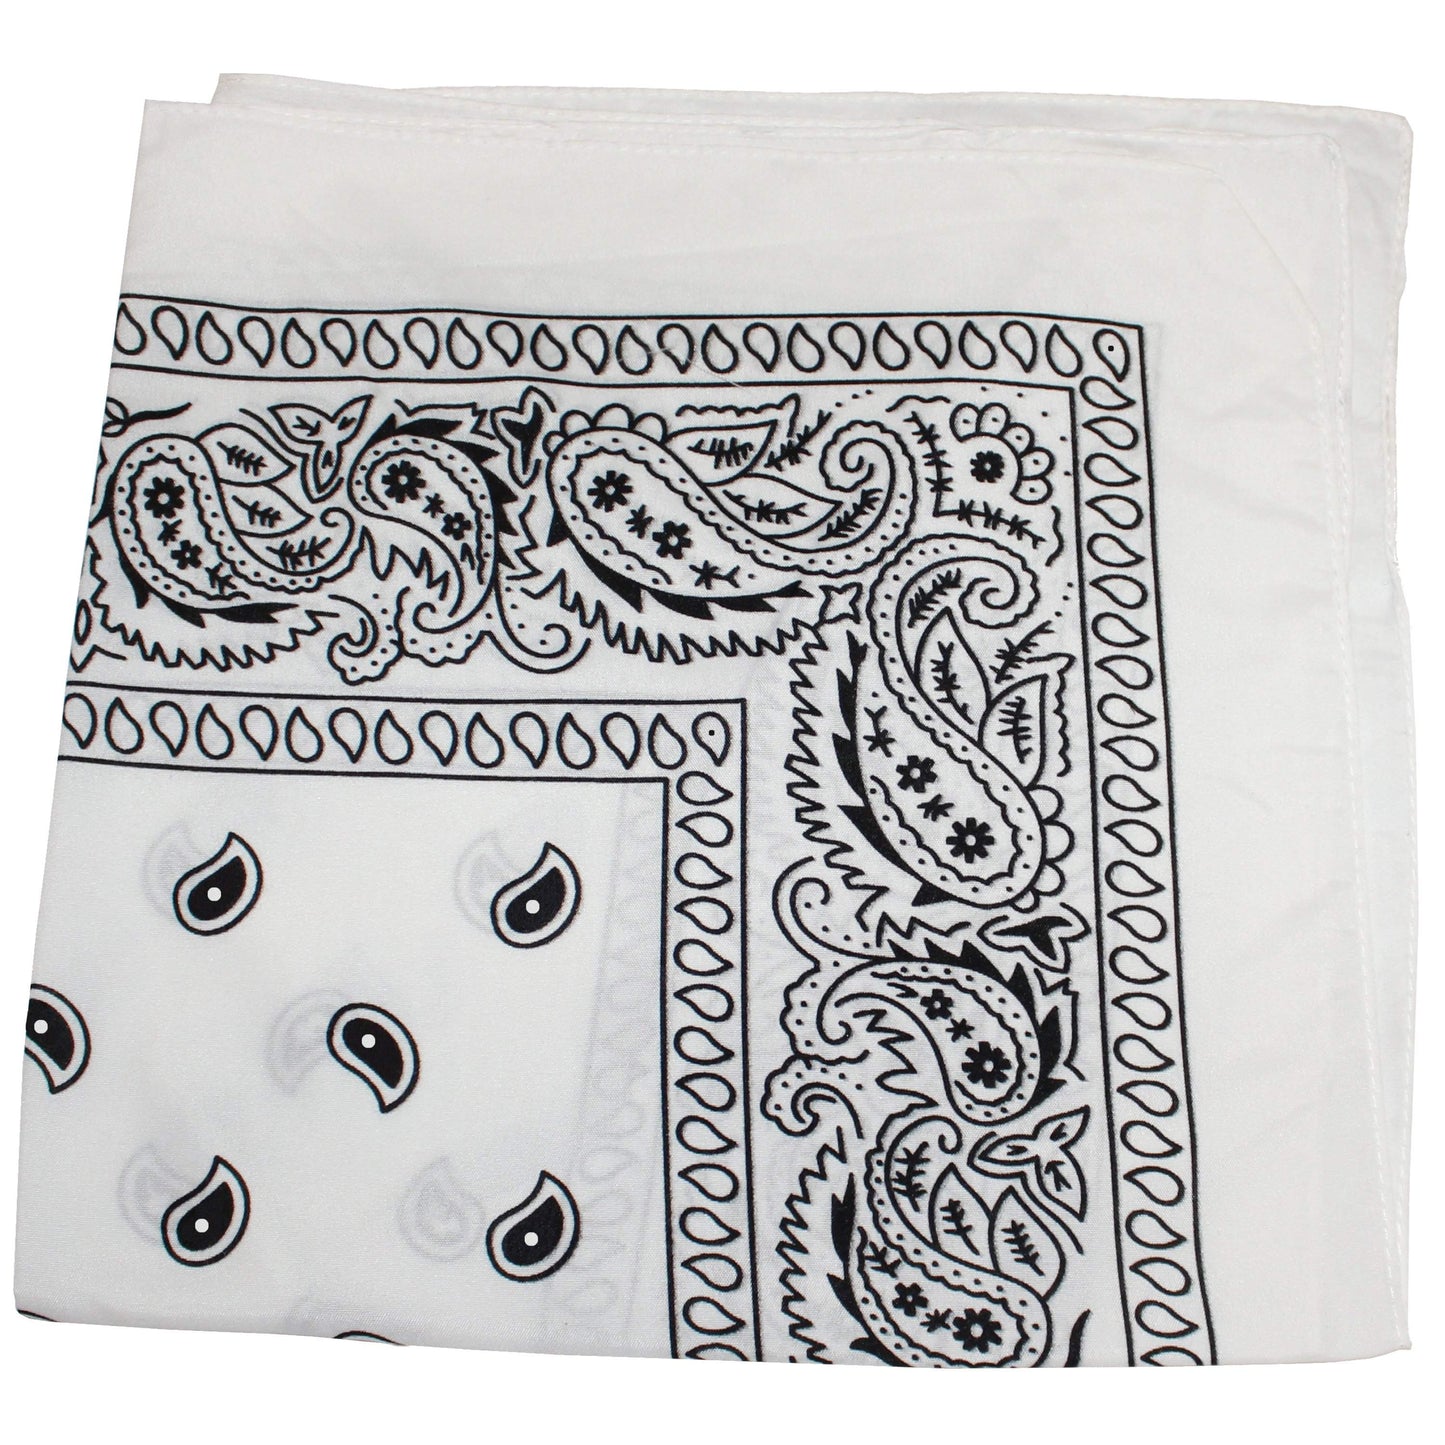 Pack of 12 X-Large Paisley Cotton Printed Bandana - 27 x 27 inches